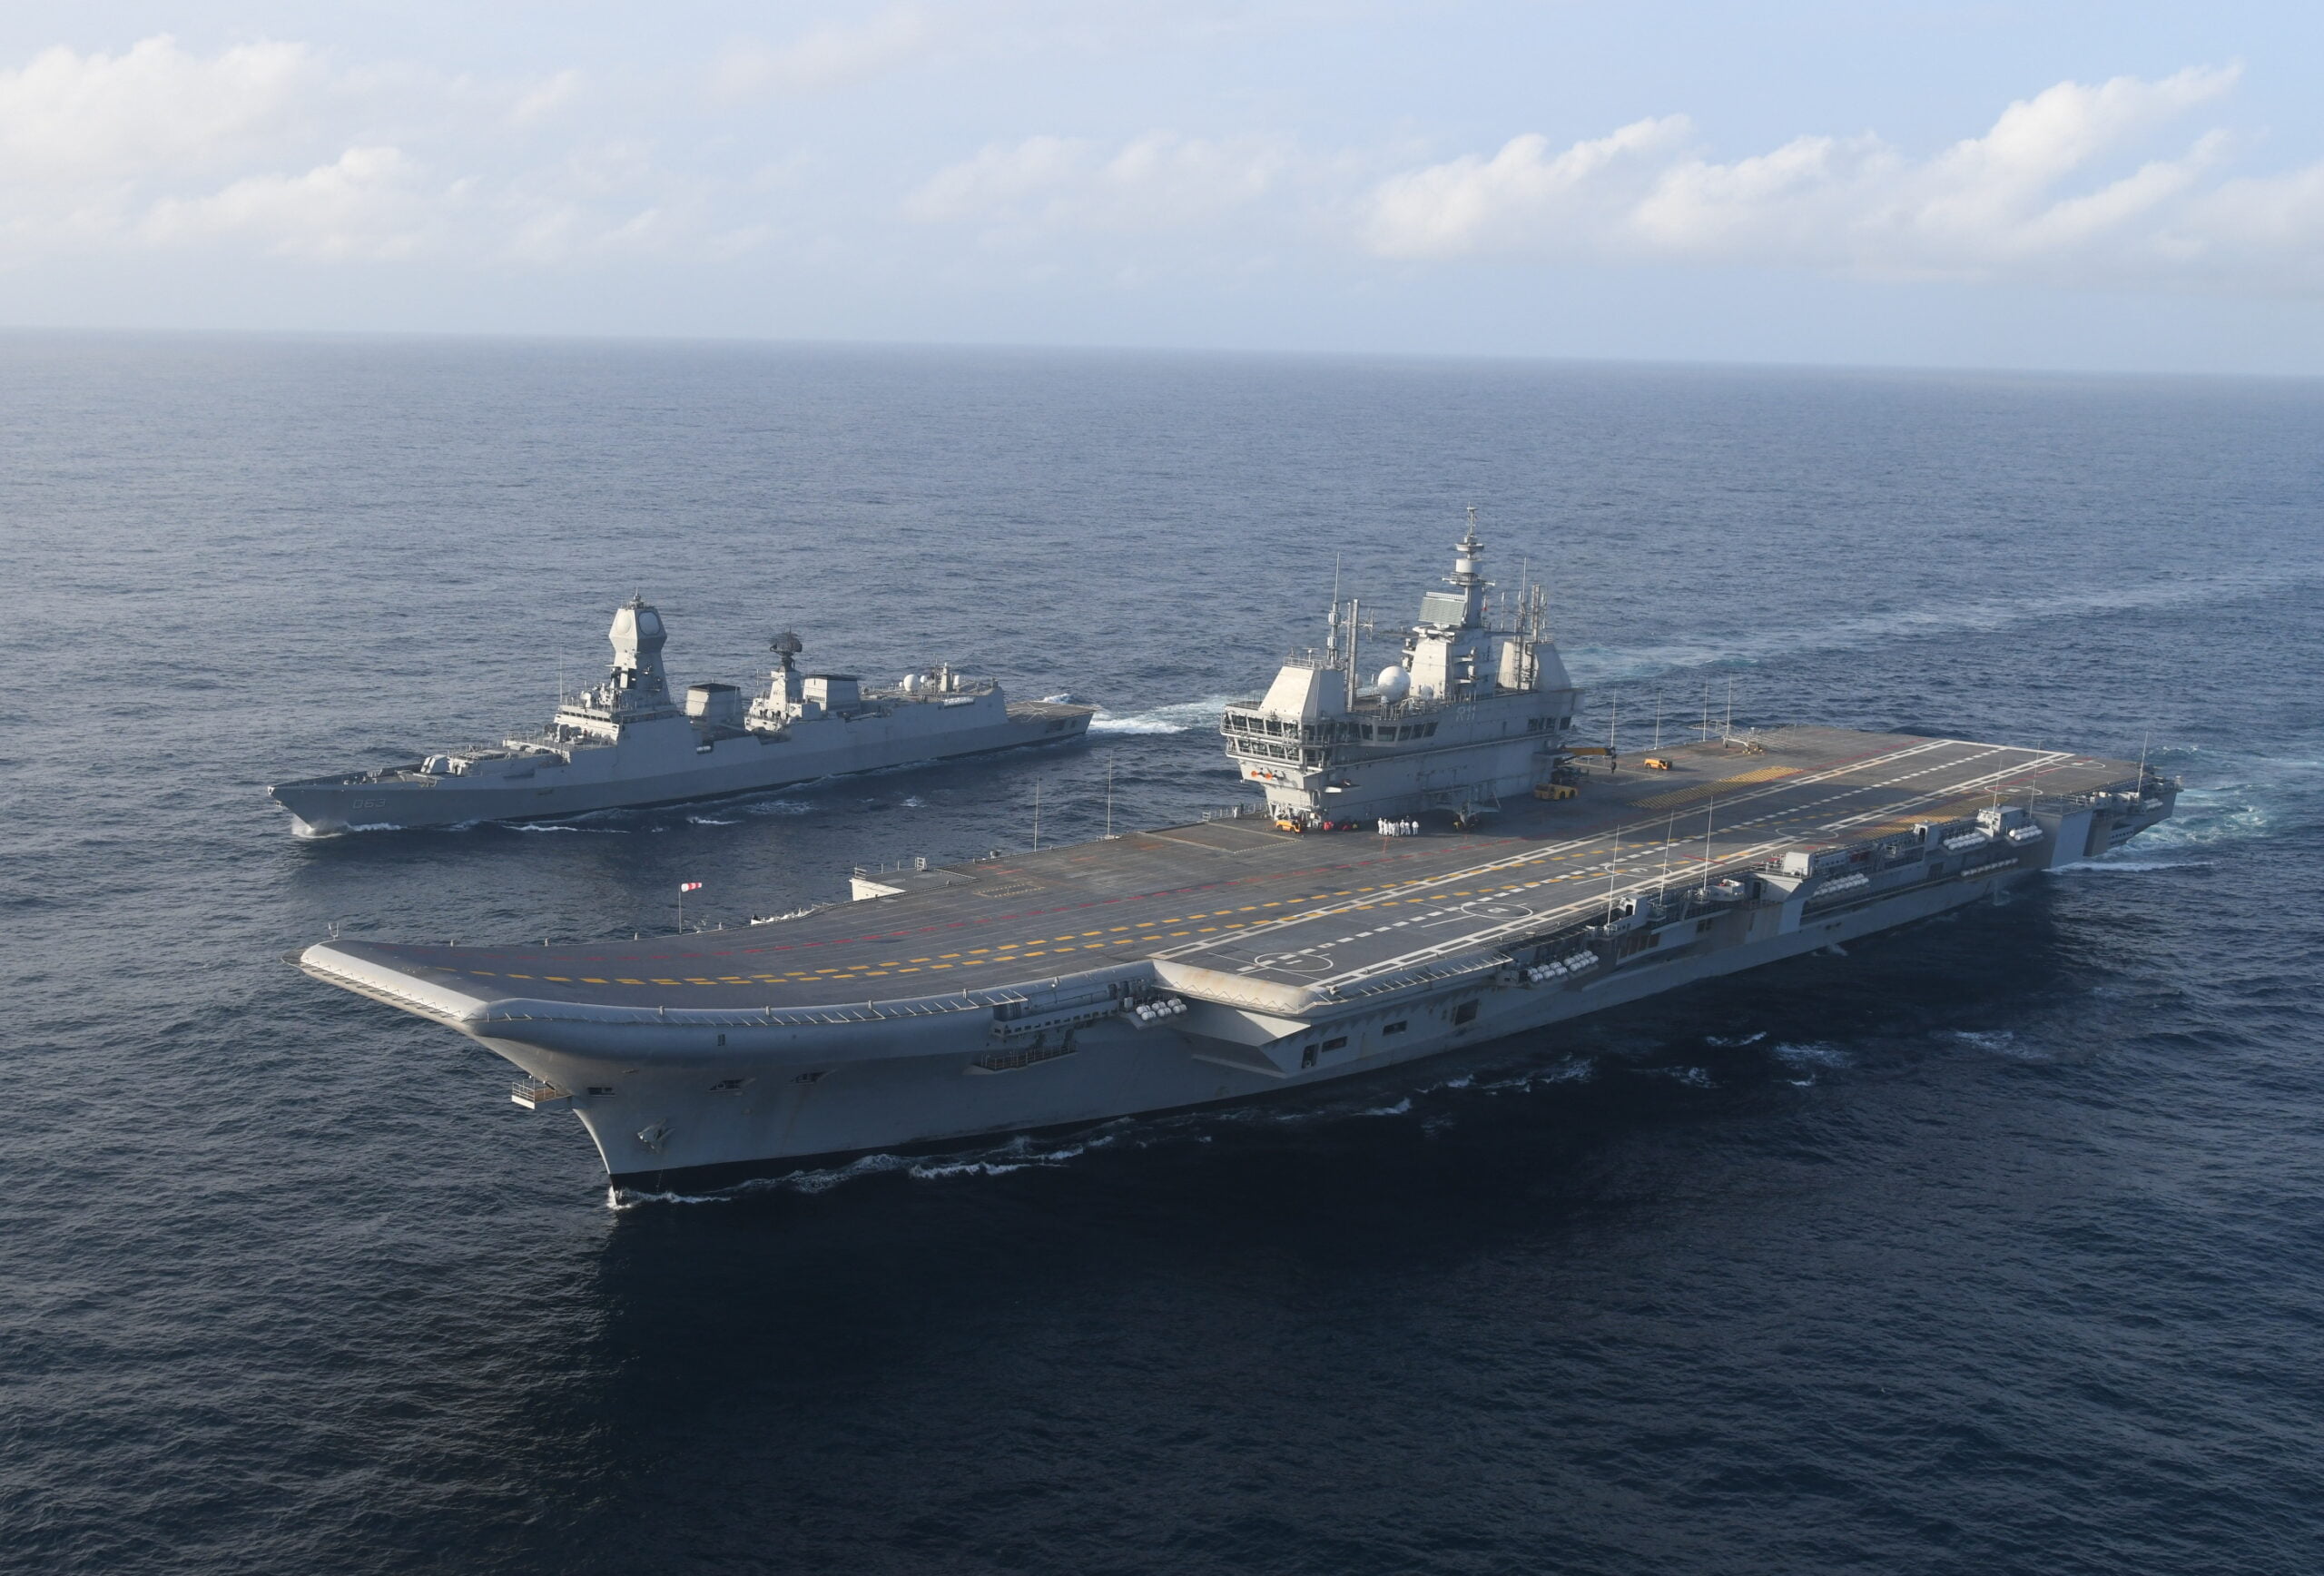 Size, Speed, Fleet And More: How The INS Vikrant And The INS Vikramaditya Compare